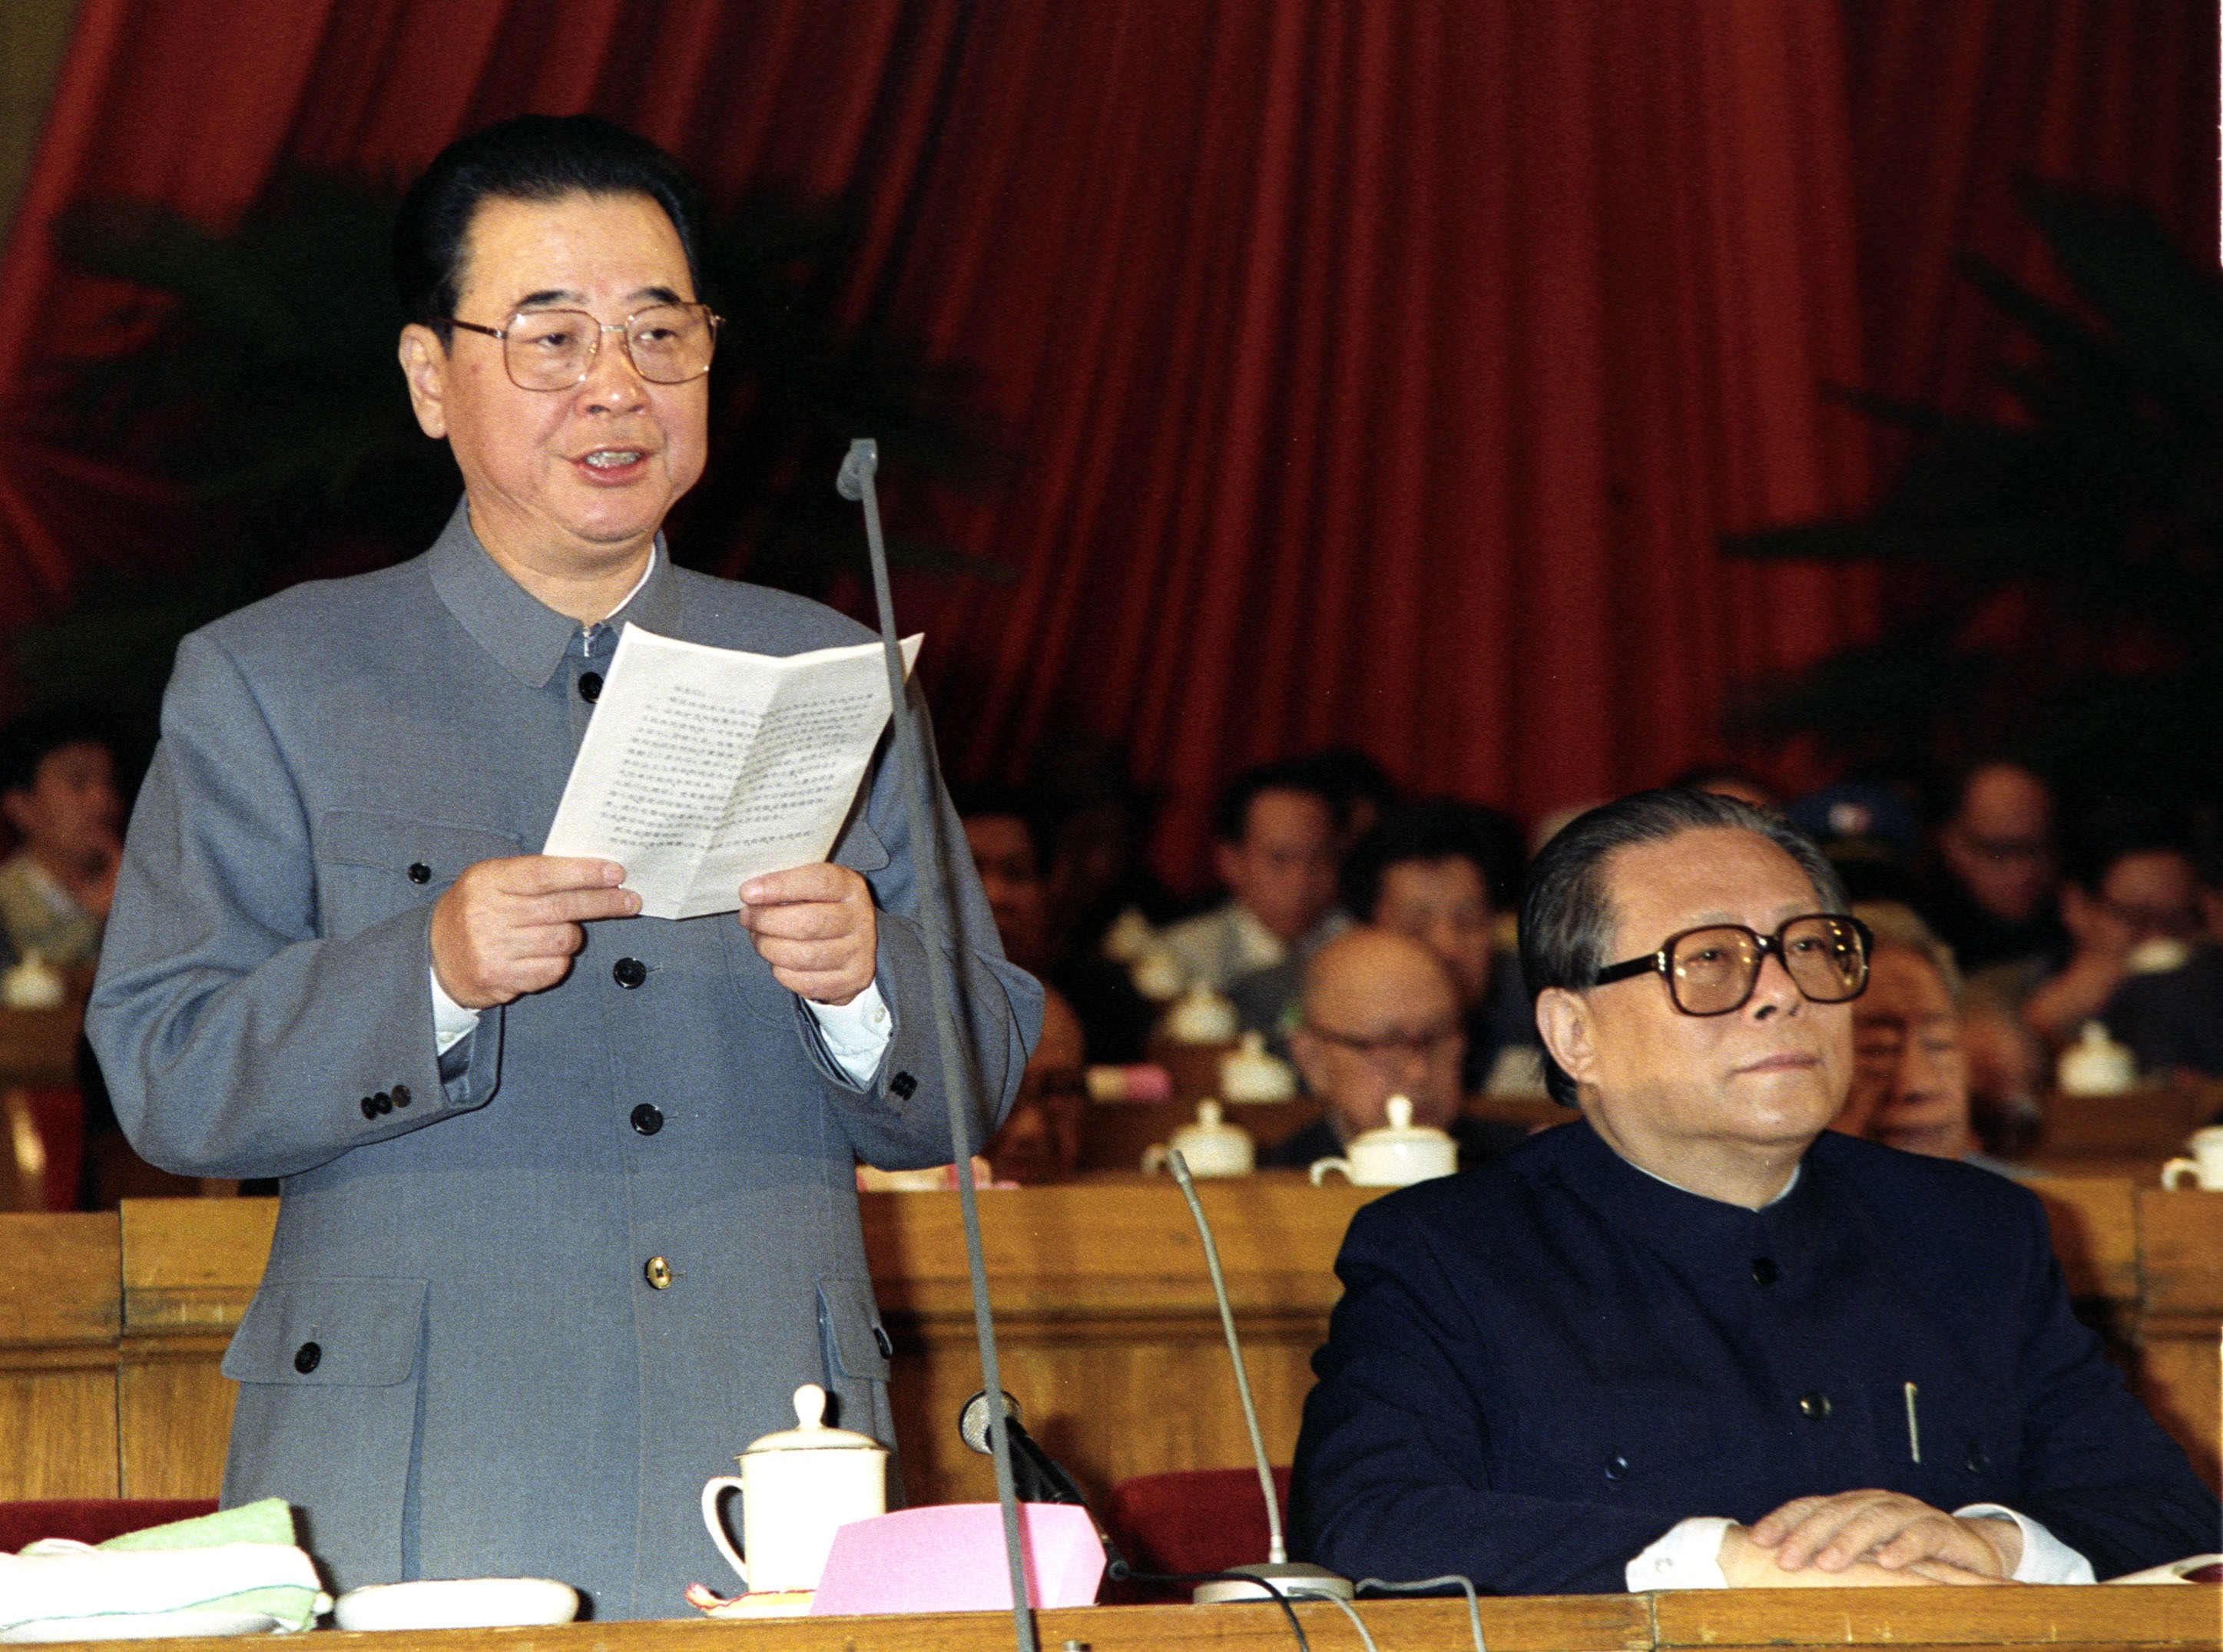 Li Peng (left) was photographed in 1989 with Jiang Zemin in the Great Hall of the People in Beijing. Li died on Monday at age 90. Photo: Kyodo